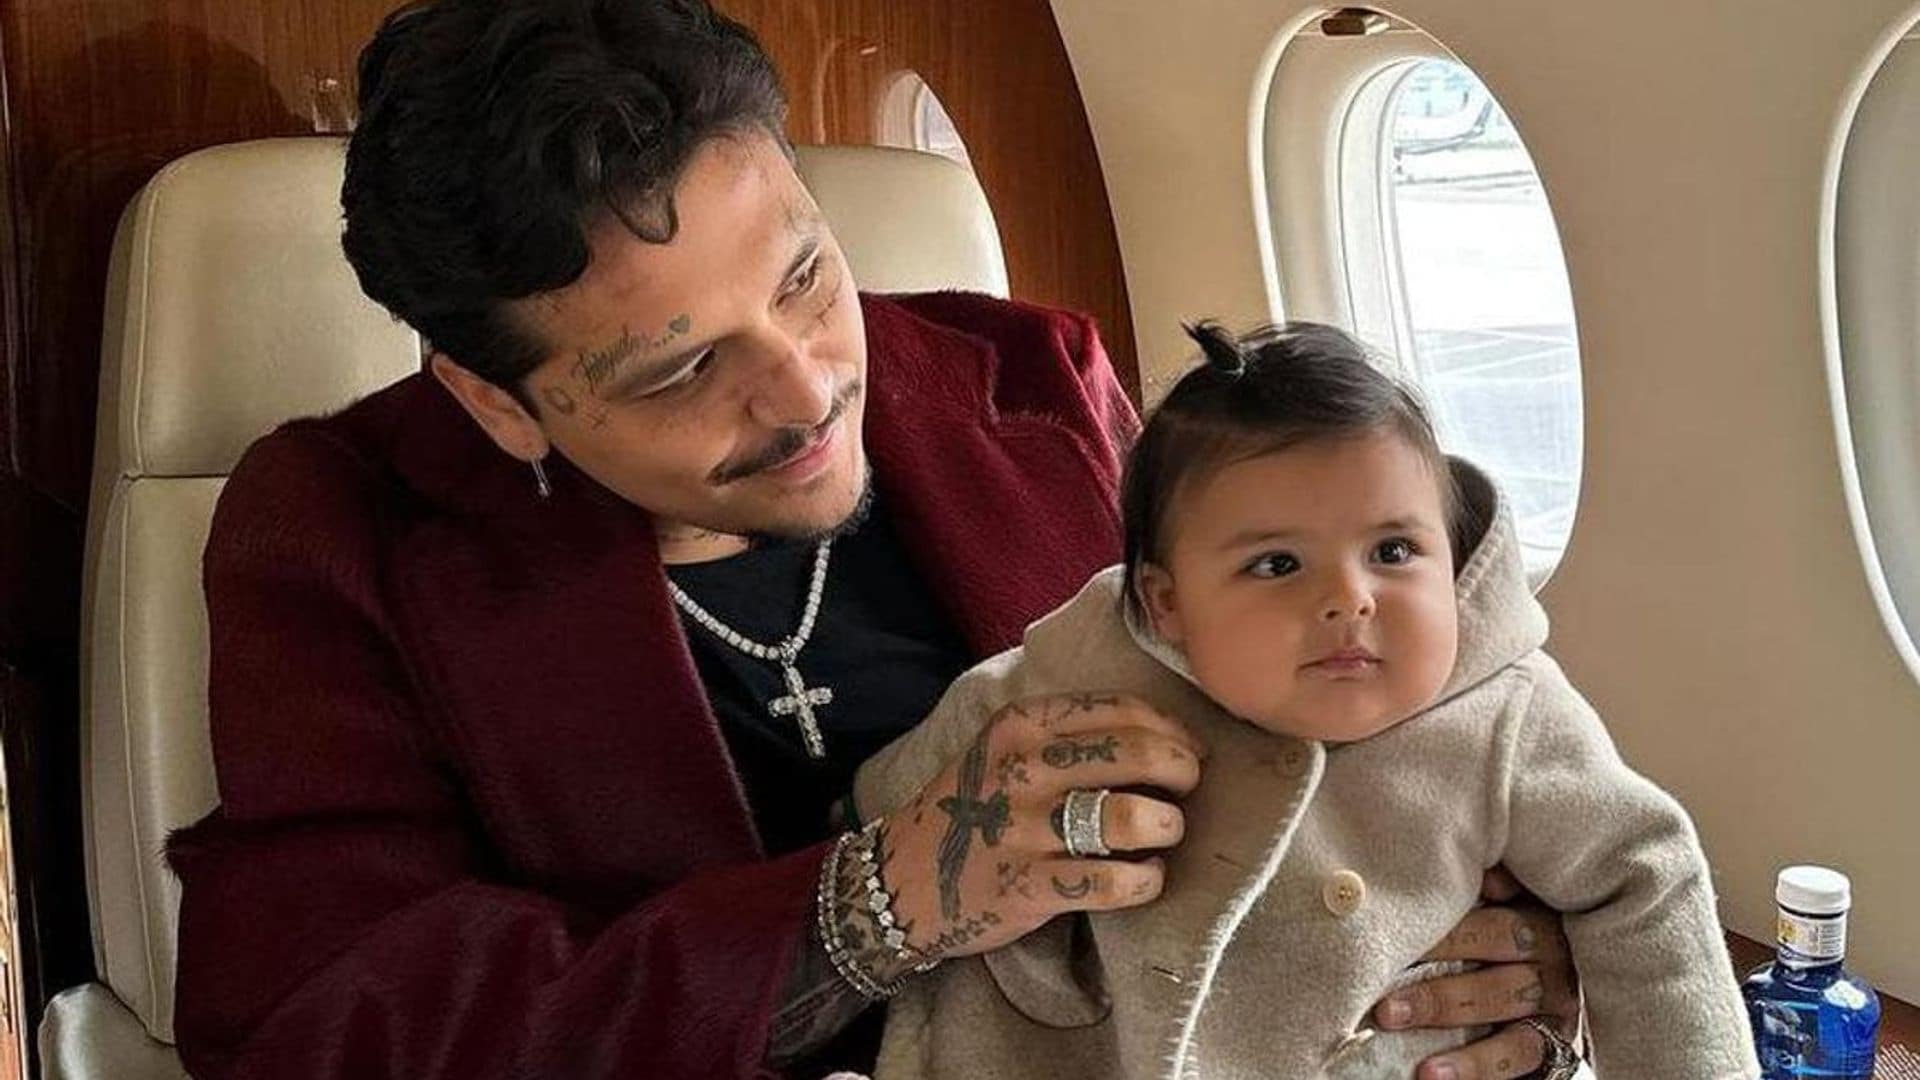 Christian Nodal opens up about daughter Inti following breakup with Cazzu: ‘I’ll always be there for her’